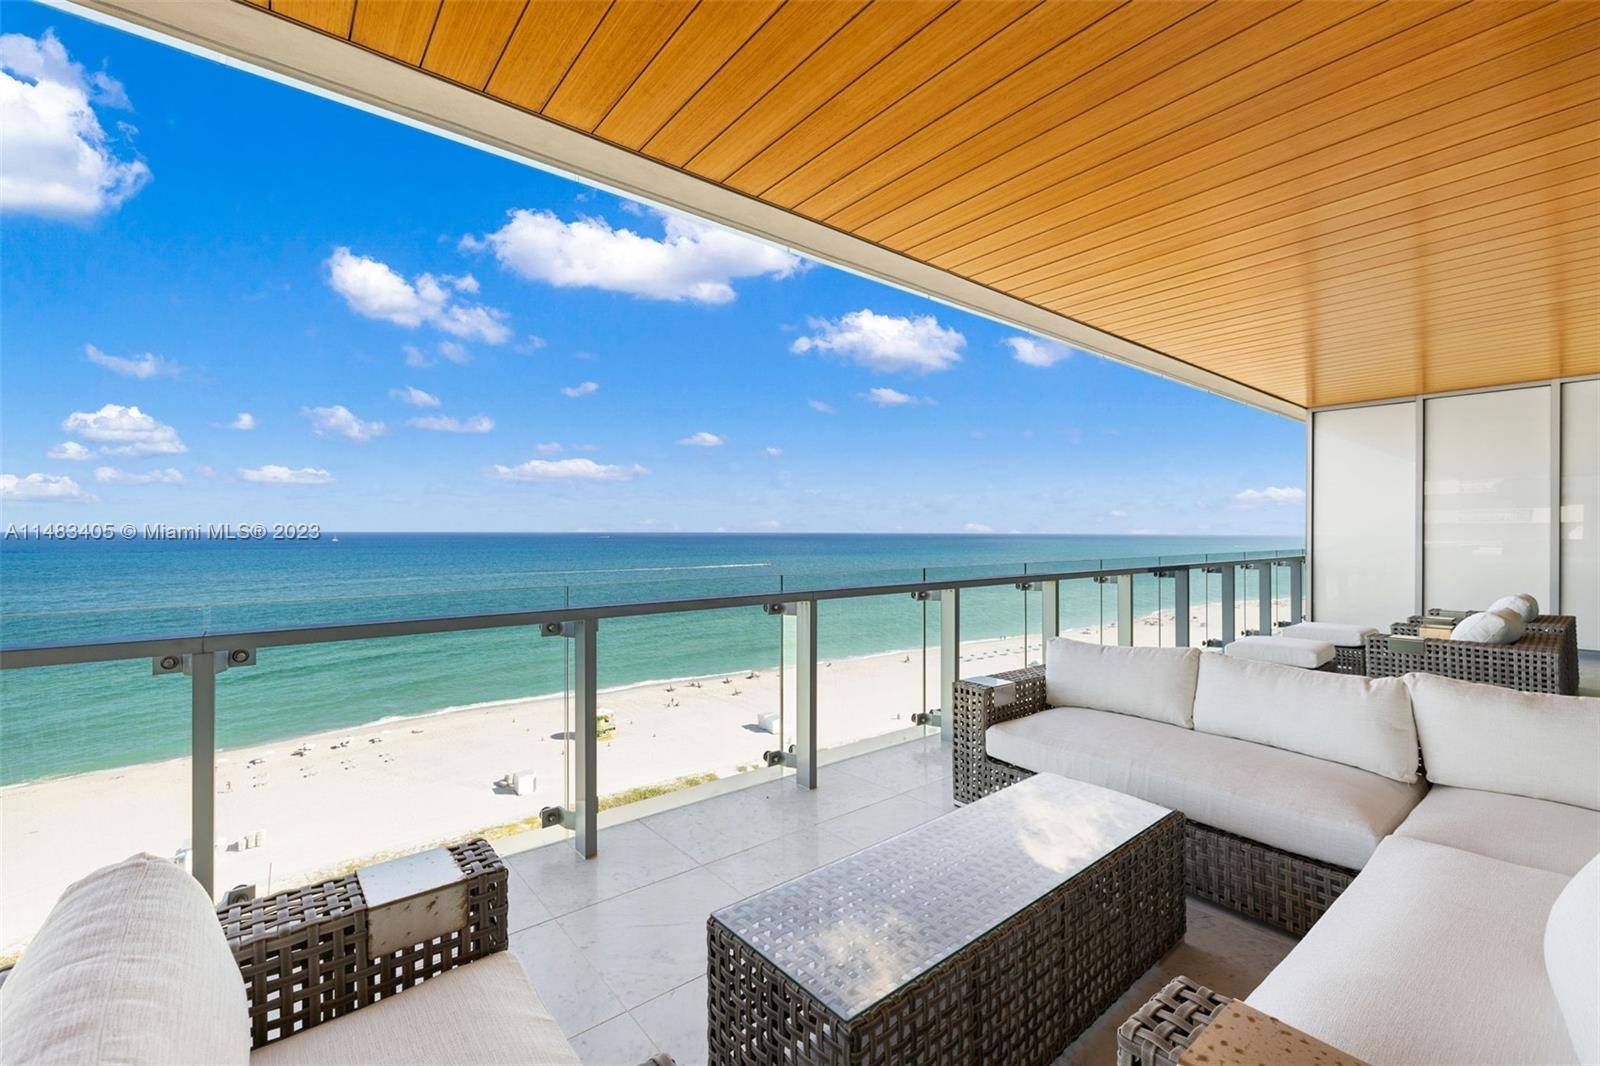 This exclusive oceanfront residence is perched along Millionaire's Row, offering a view of Miami Beach's most beautiful and sought after stretch of beachfront.